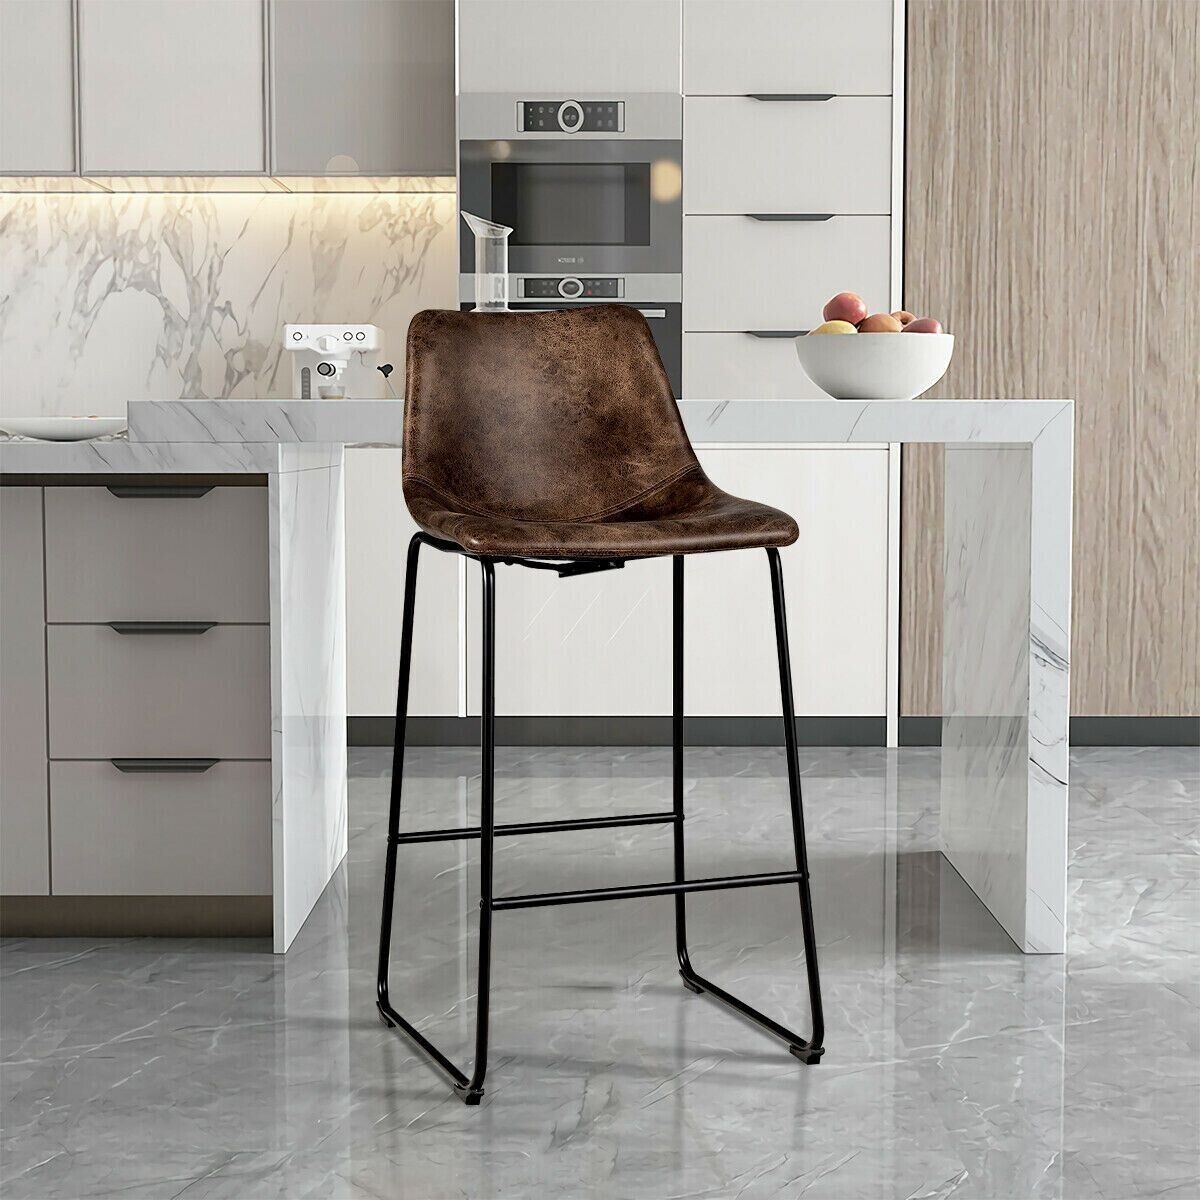 Set Of 2 Brown Faux Suede Bar Stools